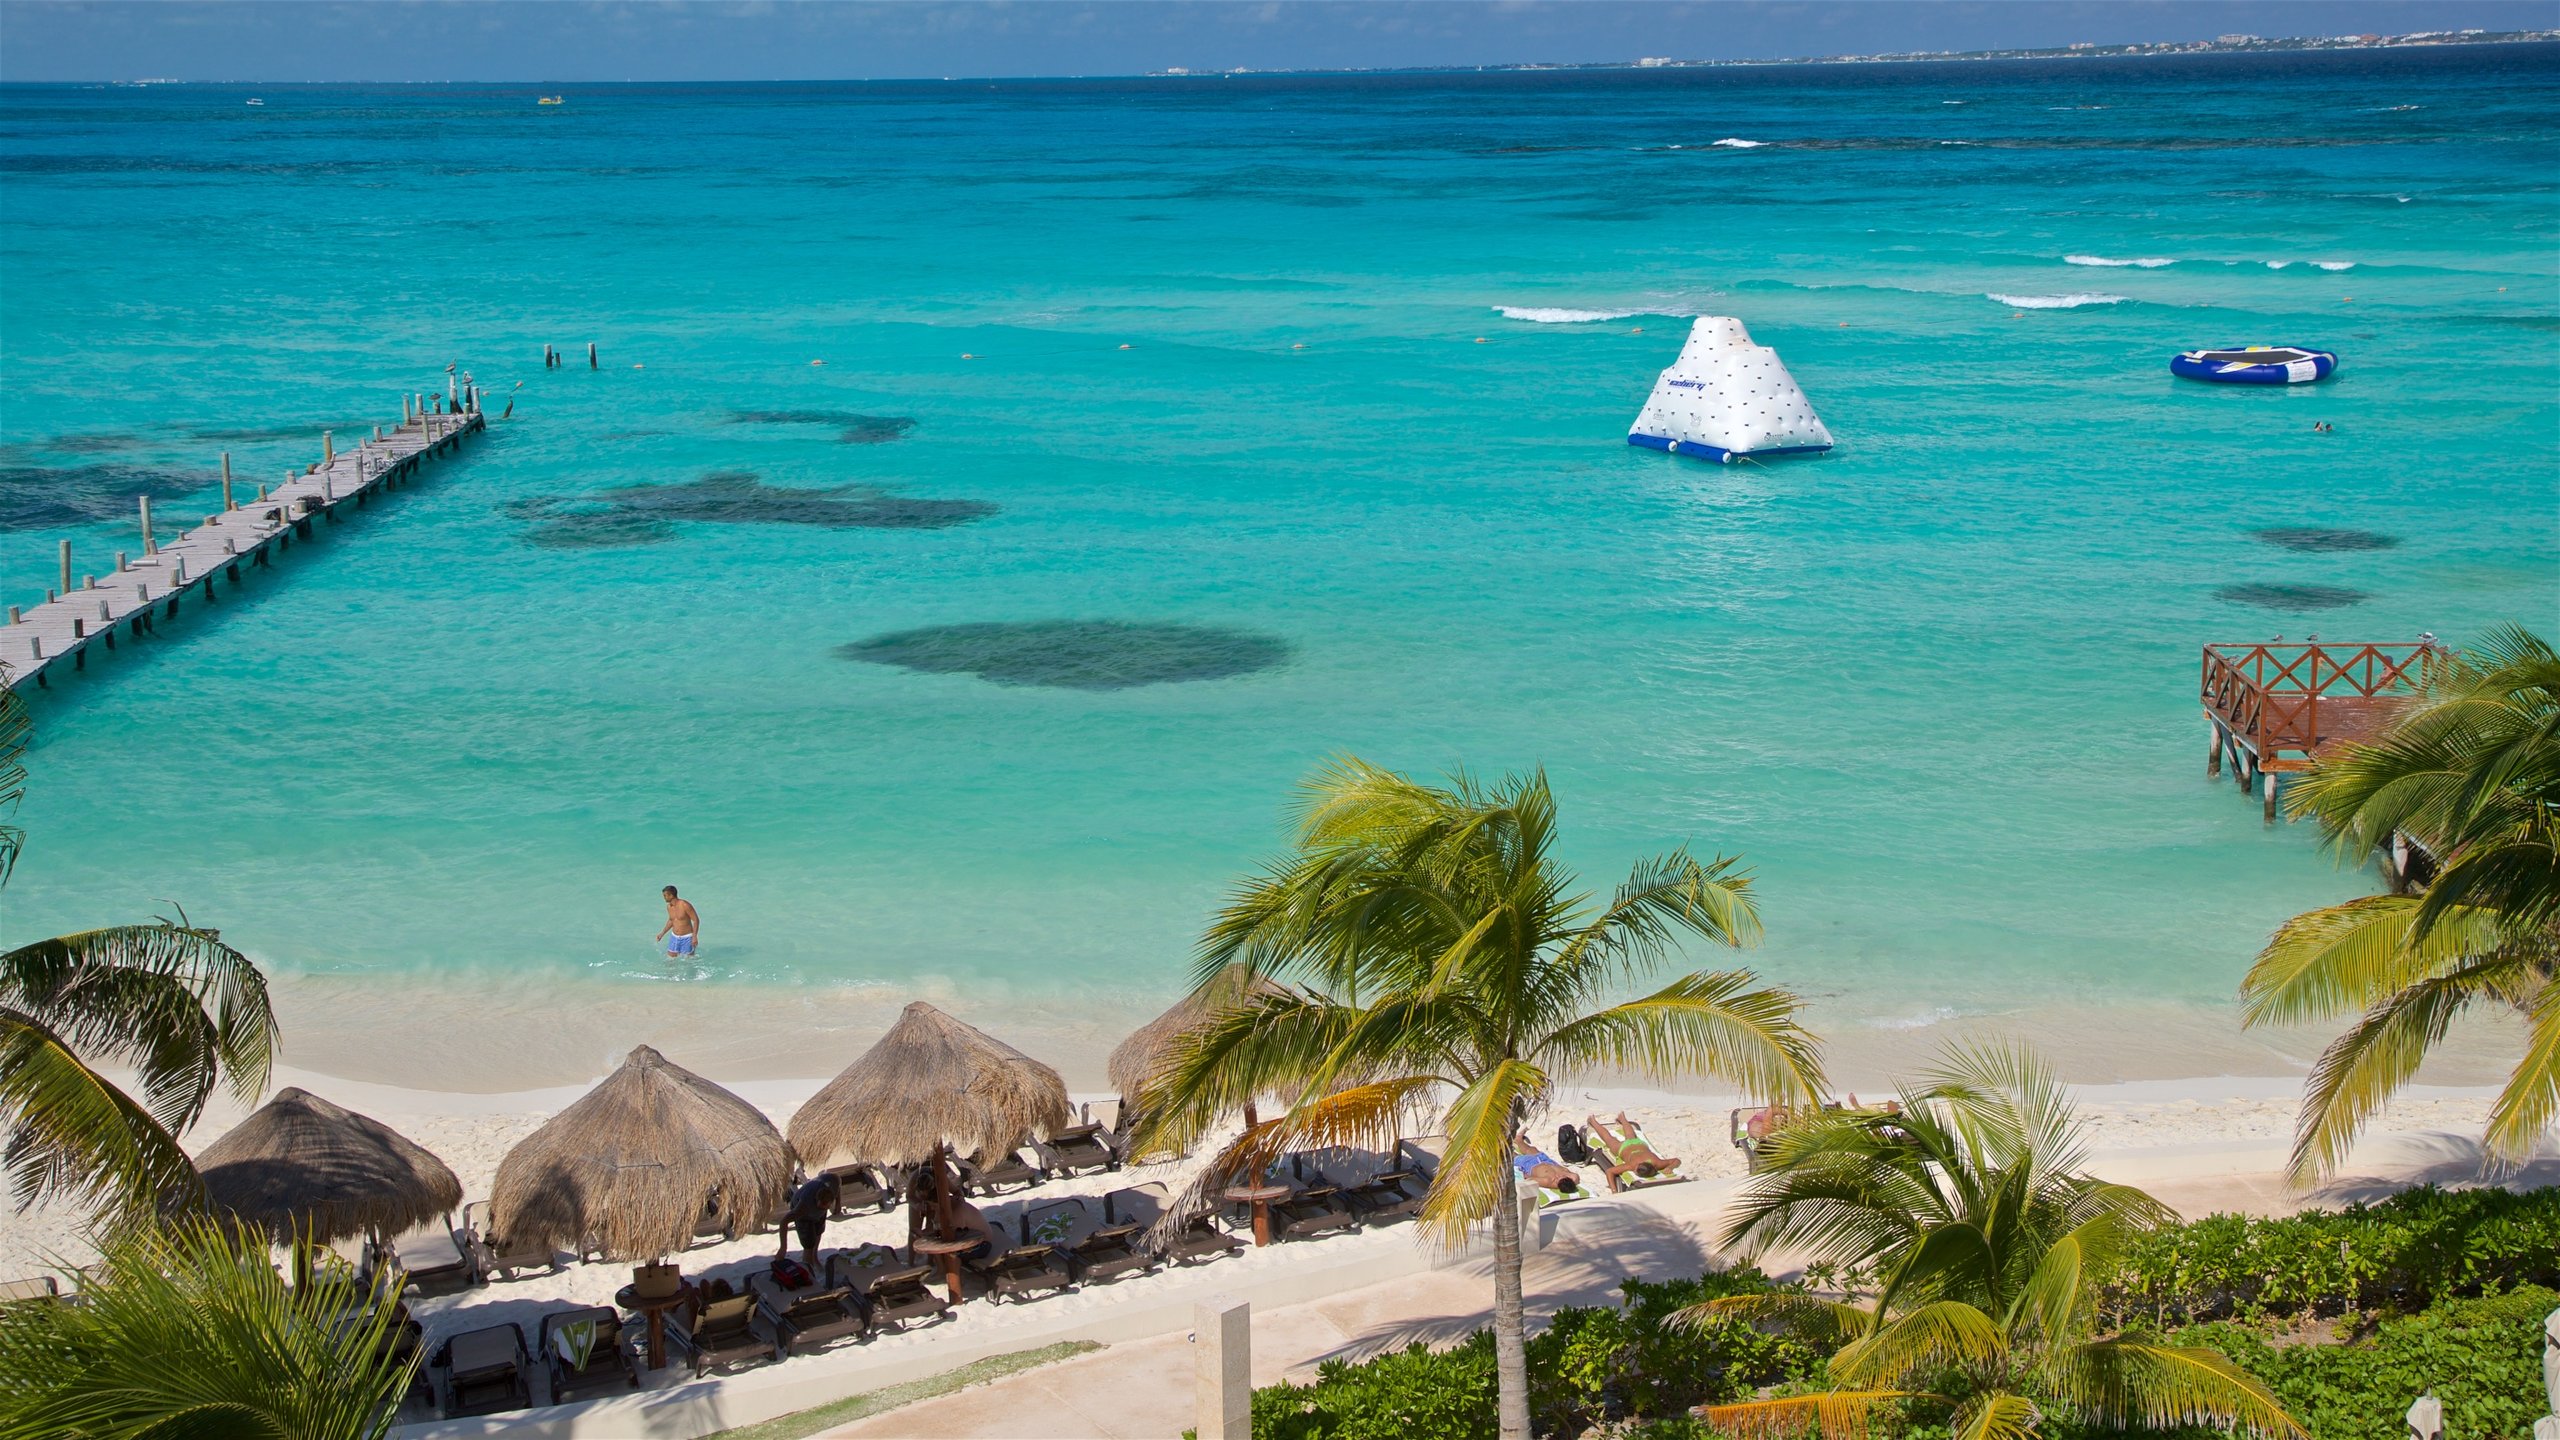 What to see in Cancun. Top 10 Attractions.